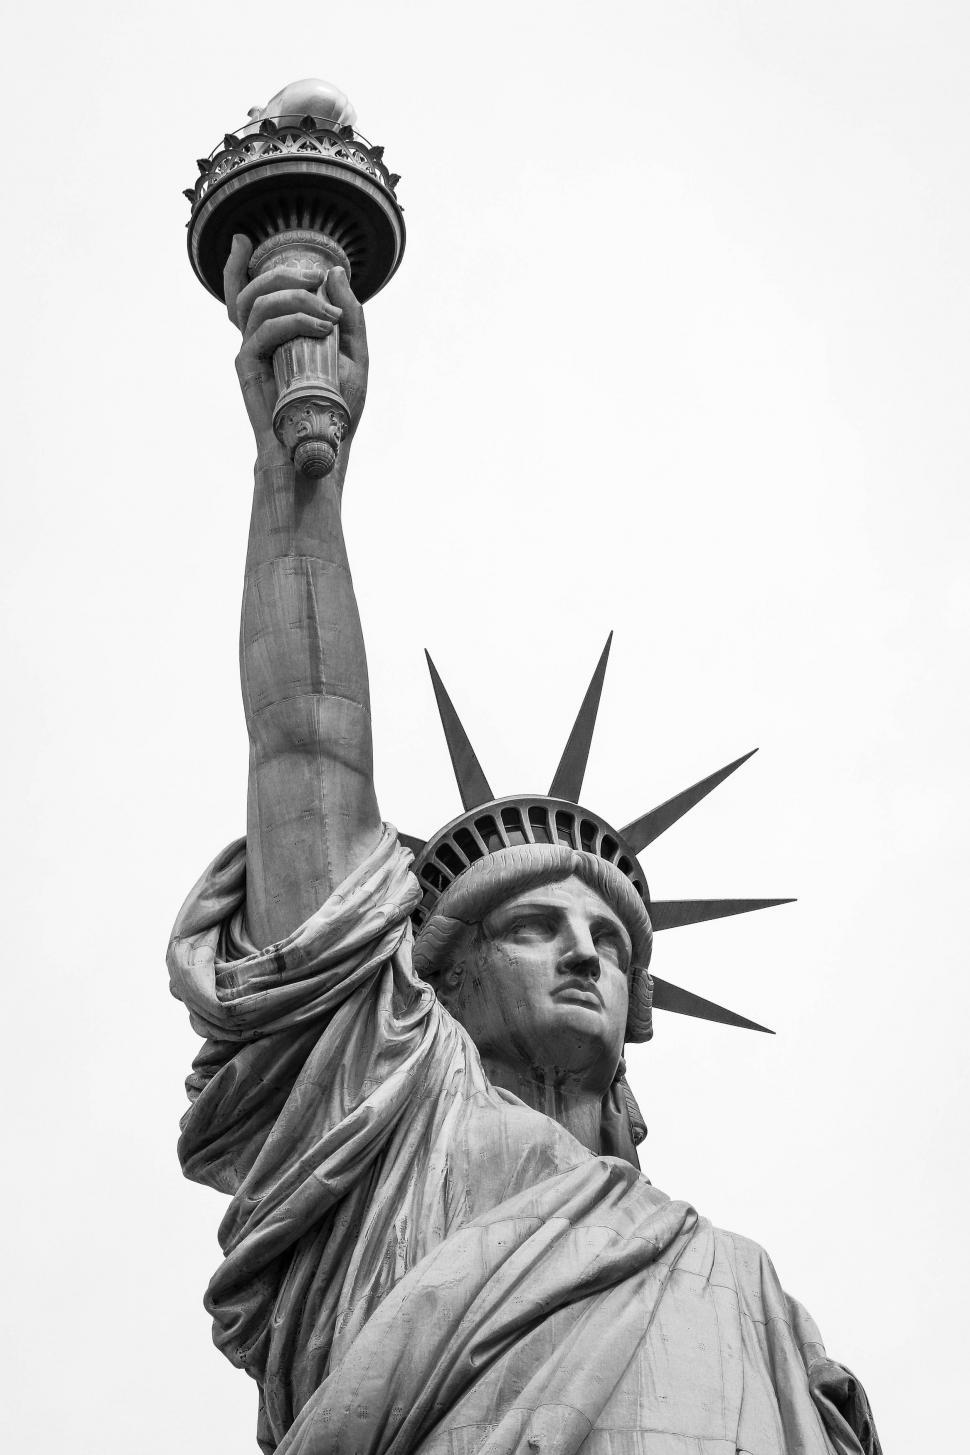 Free Image of Statue of Liberty in Black and White 